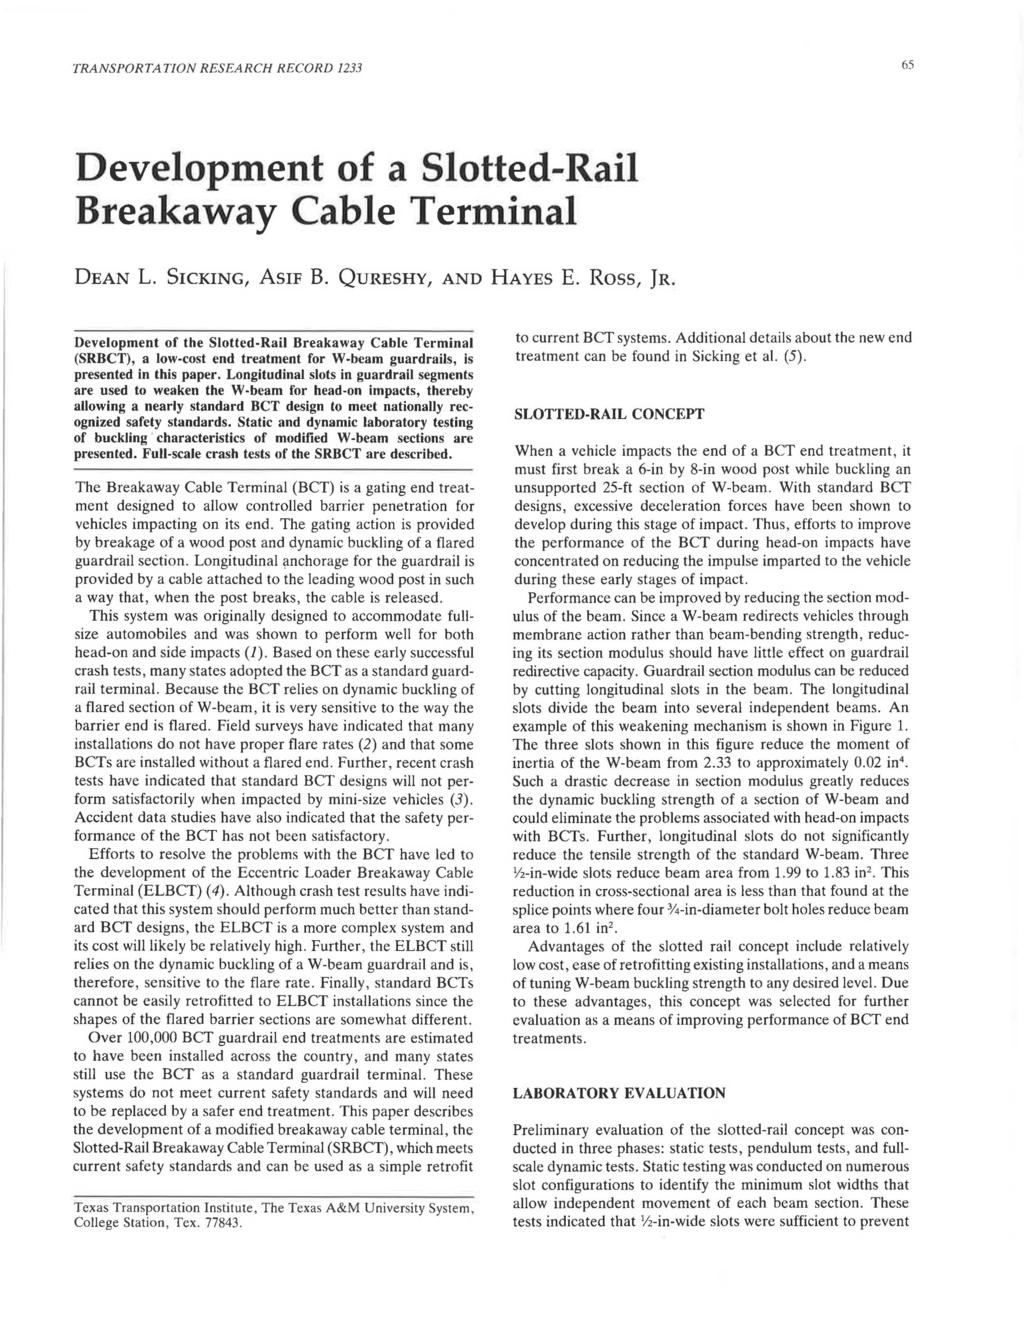 TRANSPORTATION RESEA RCH RECORD 1233 65 Development of a Slotted-Rail Breakaway Cable Terminal DEAN L. SICKING, ASIF B. QuRESHY, AND HAYES E. Ross, JR.